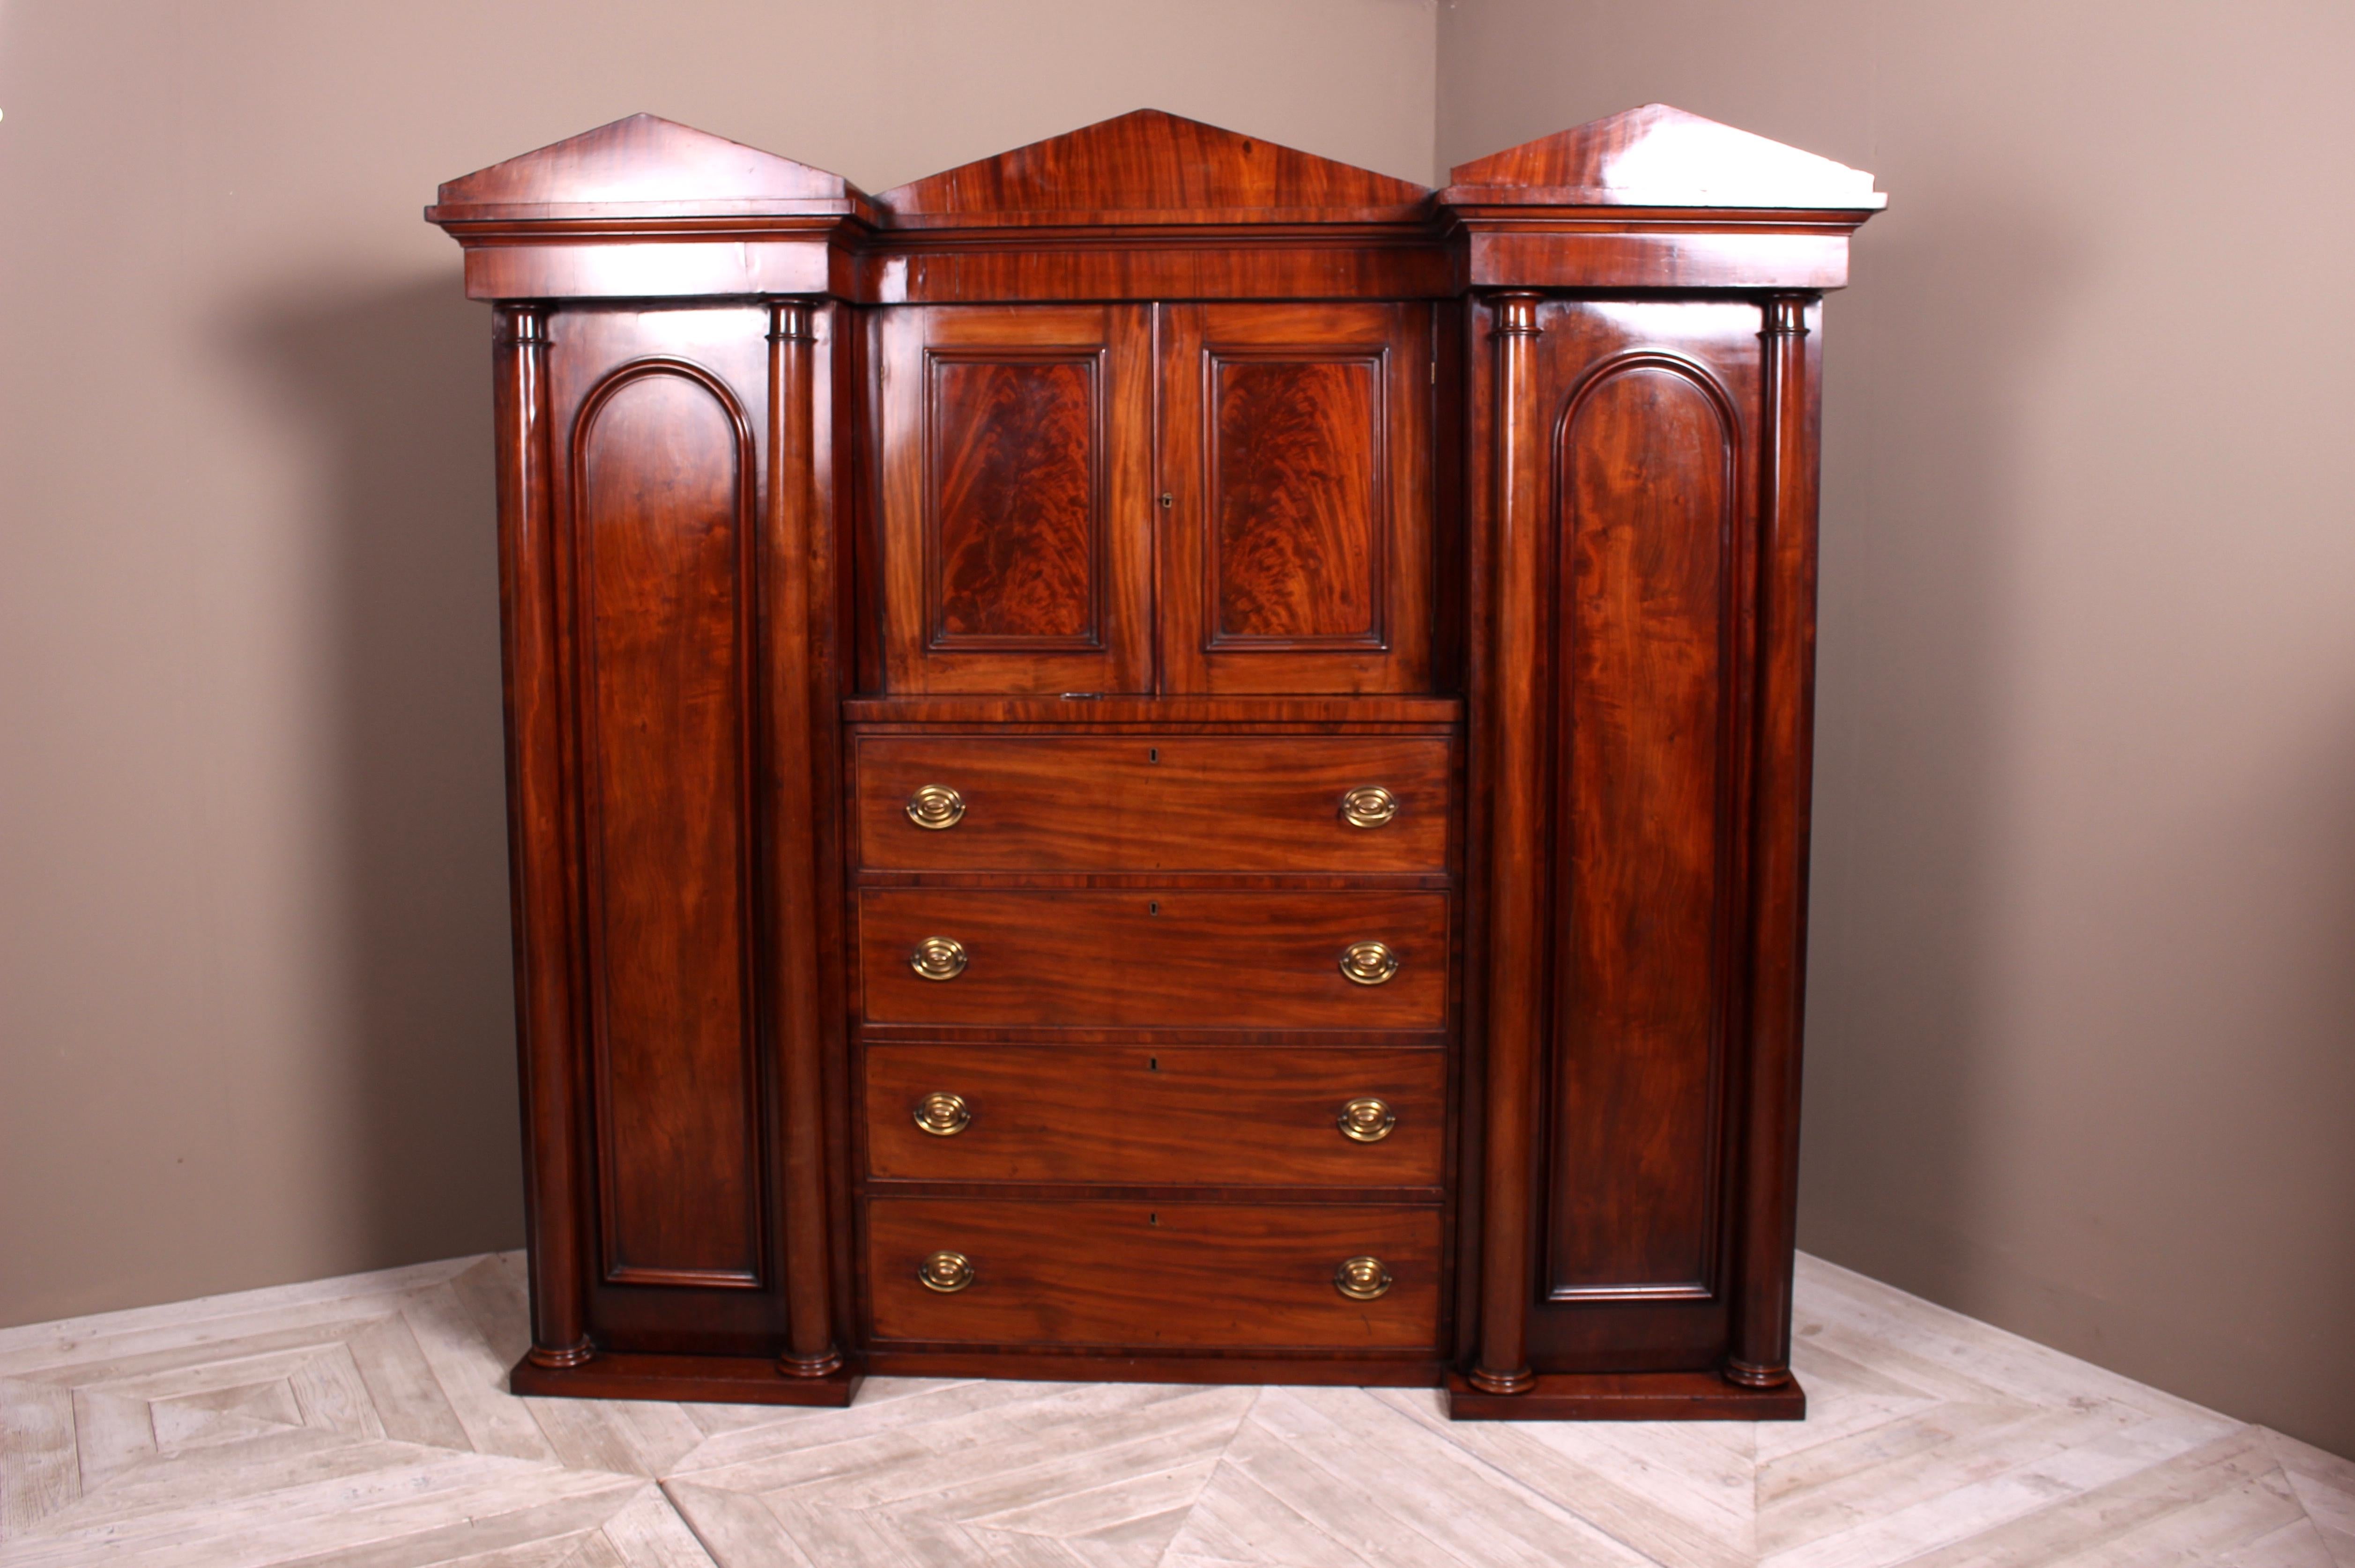 A beautiful Victorian mahogany Compactum wardrobe circa 1850 of good colour and proportions. The architectural cornice sits above central cupboard with lock and key. Below sits a bank of four good sized drawers. Flanked by wardrobes with